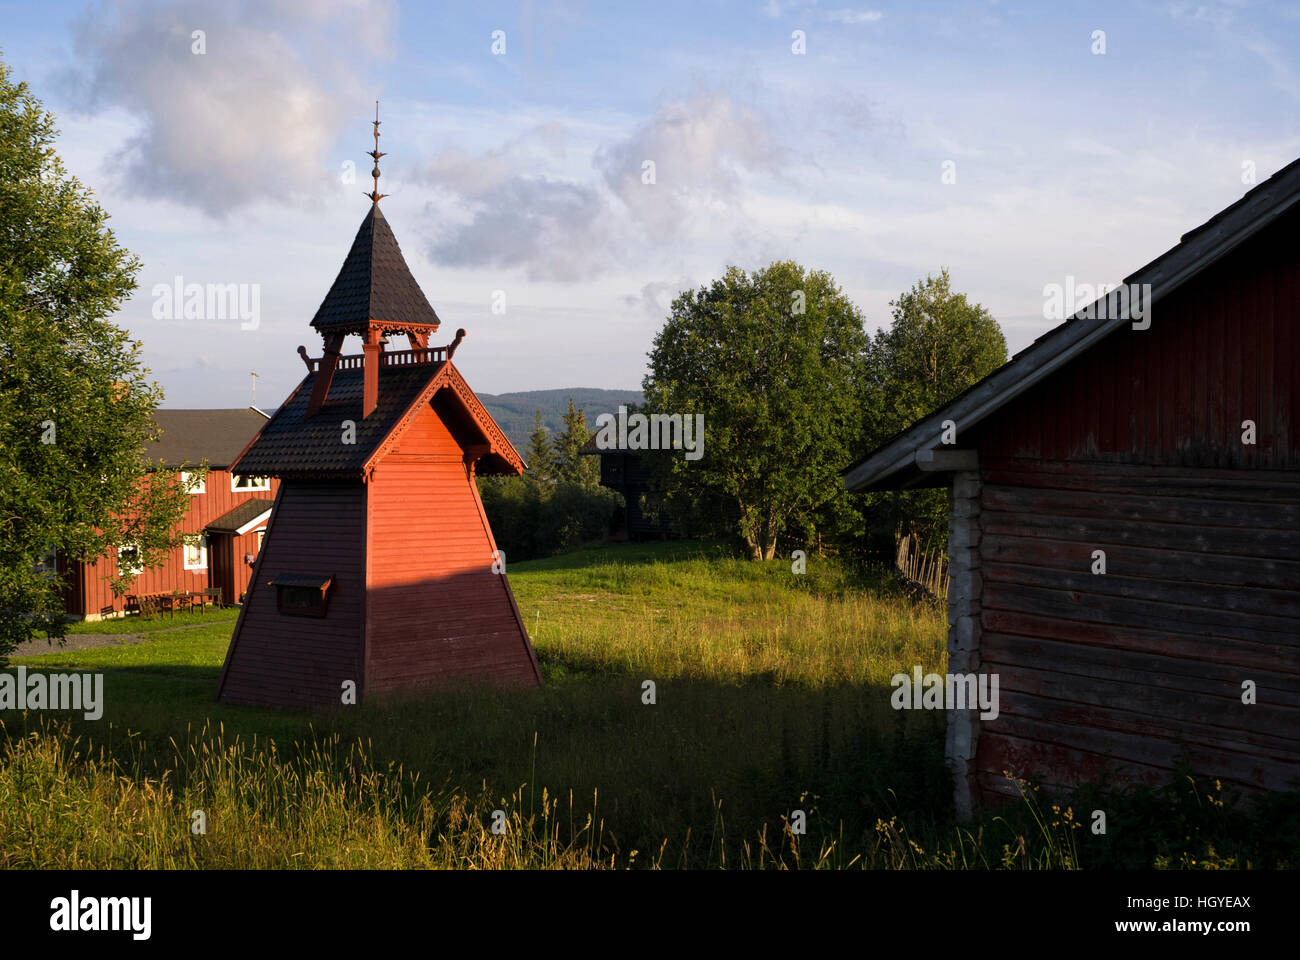 Bell tower on a Norwegian farm Stock Photo